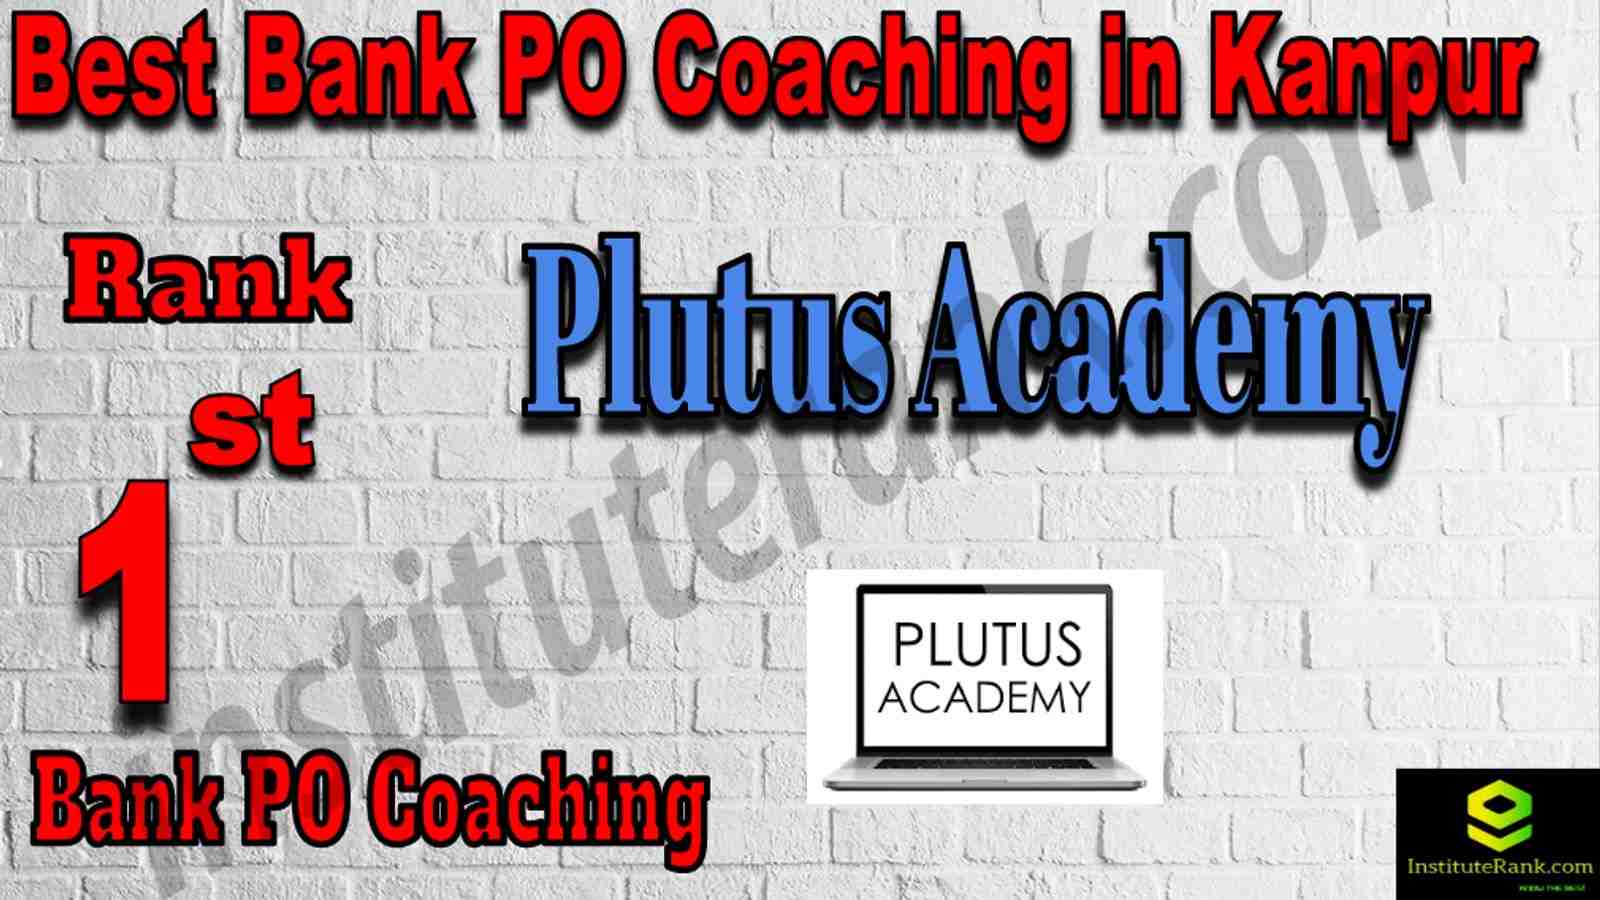 1st Best Bank PO Coaching in Kanpur